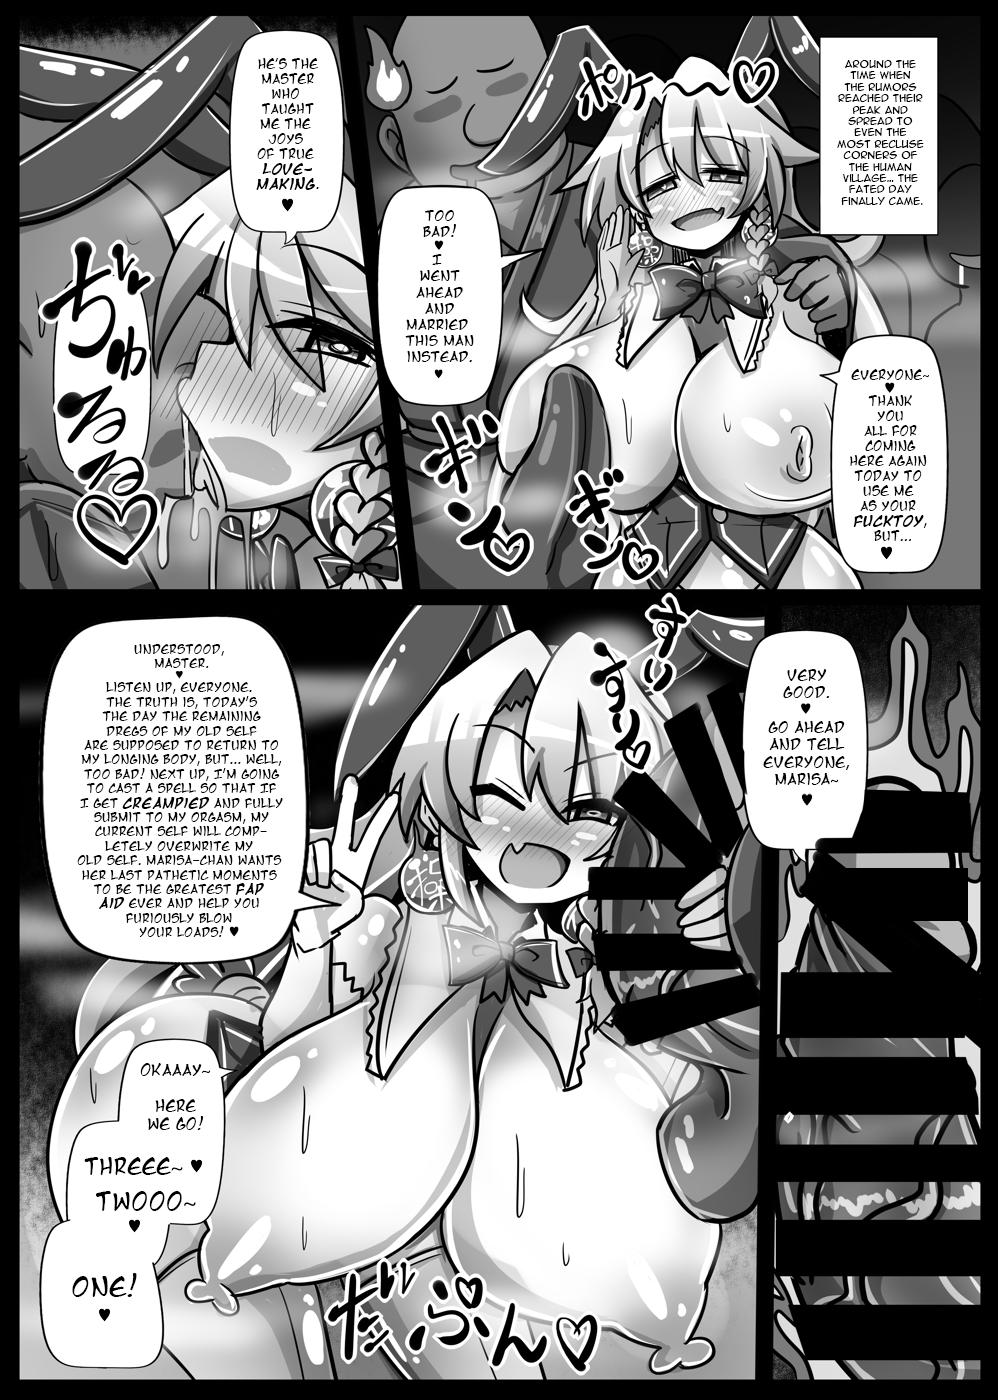 Mexico Paradise of Fake Lovers The Brainwashing of Young Maidens Story 2 - Touhou project Cuckolding - Page 9